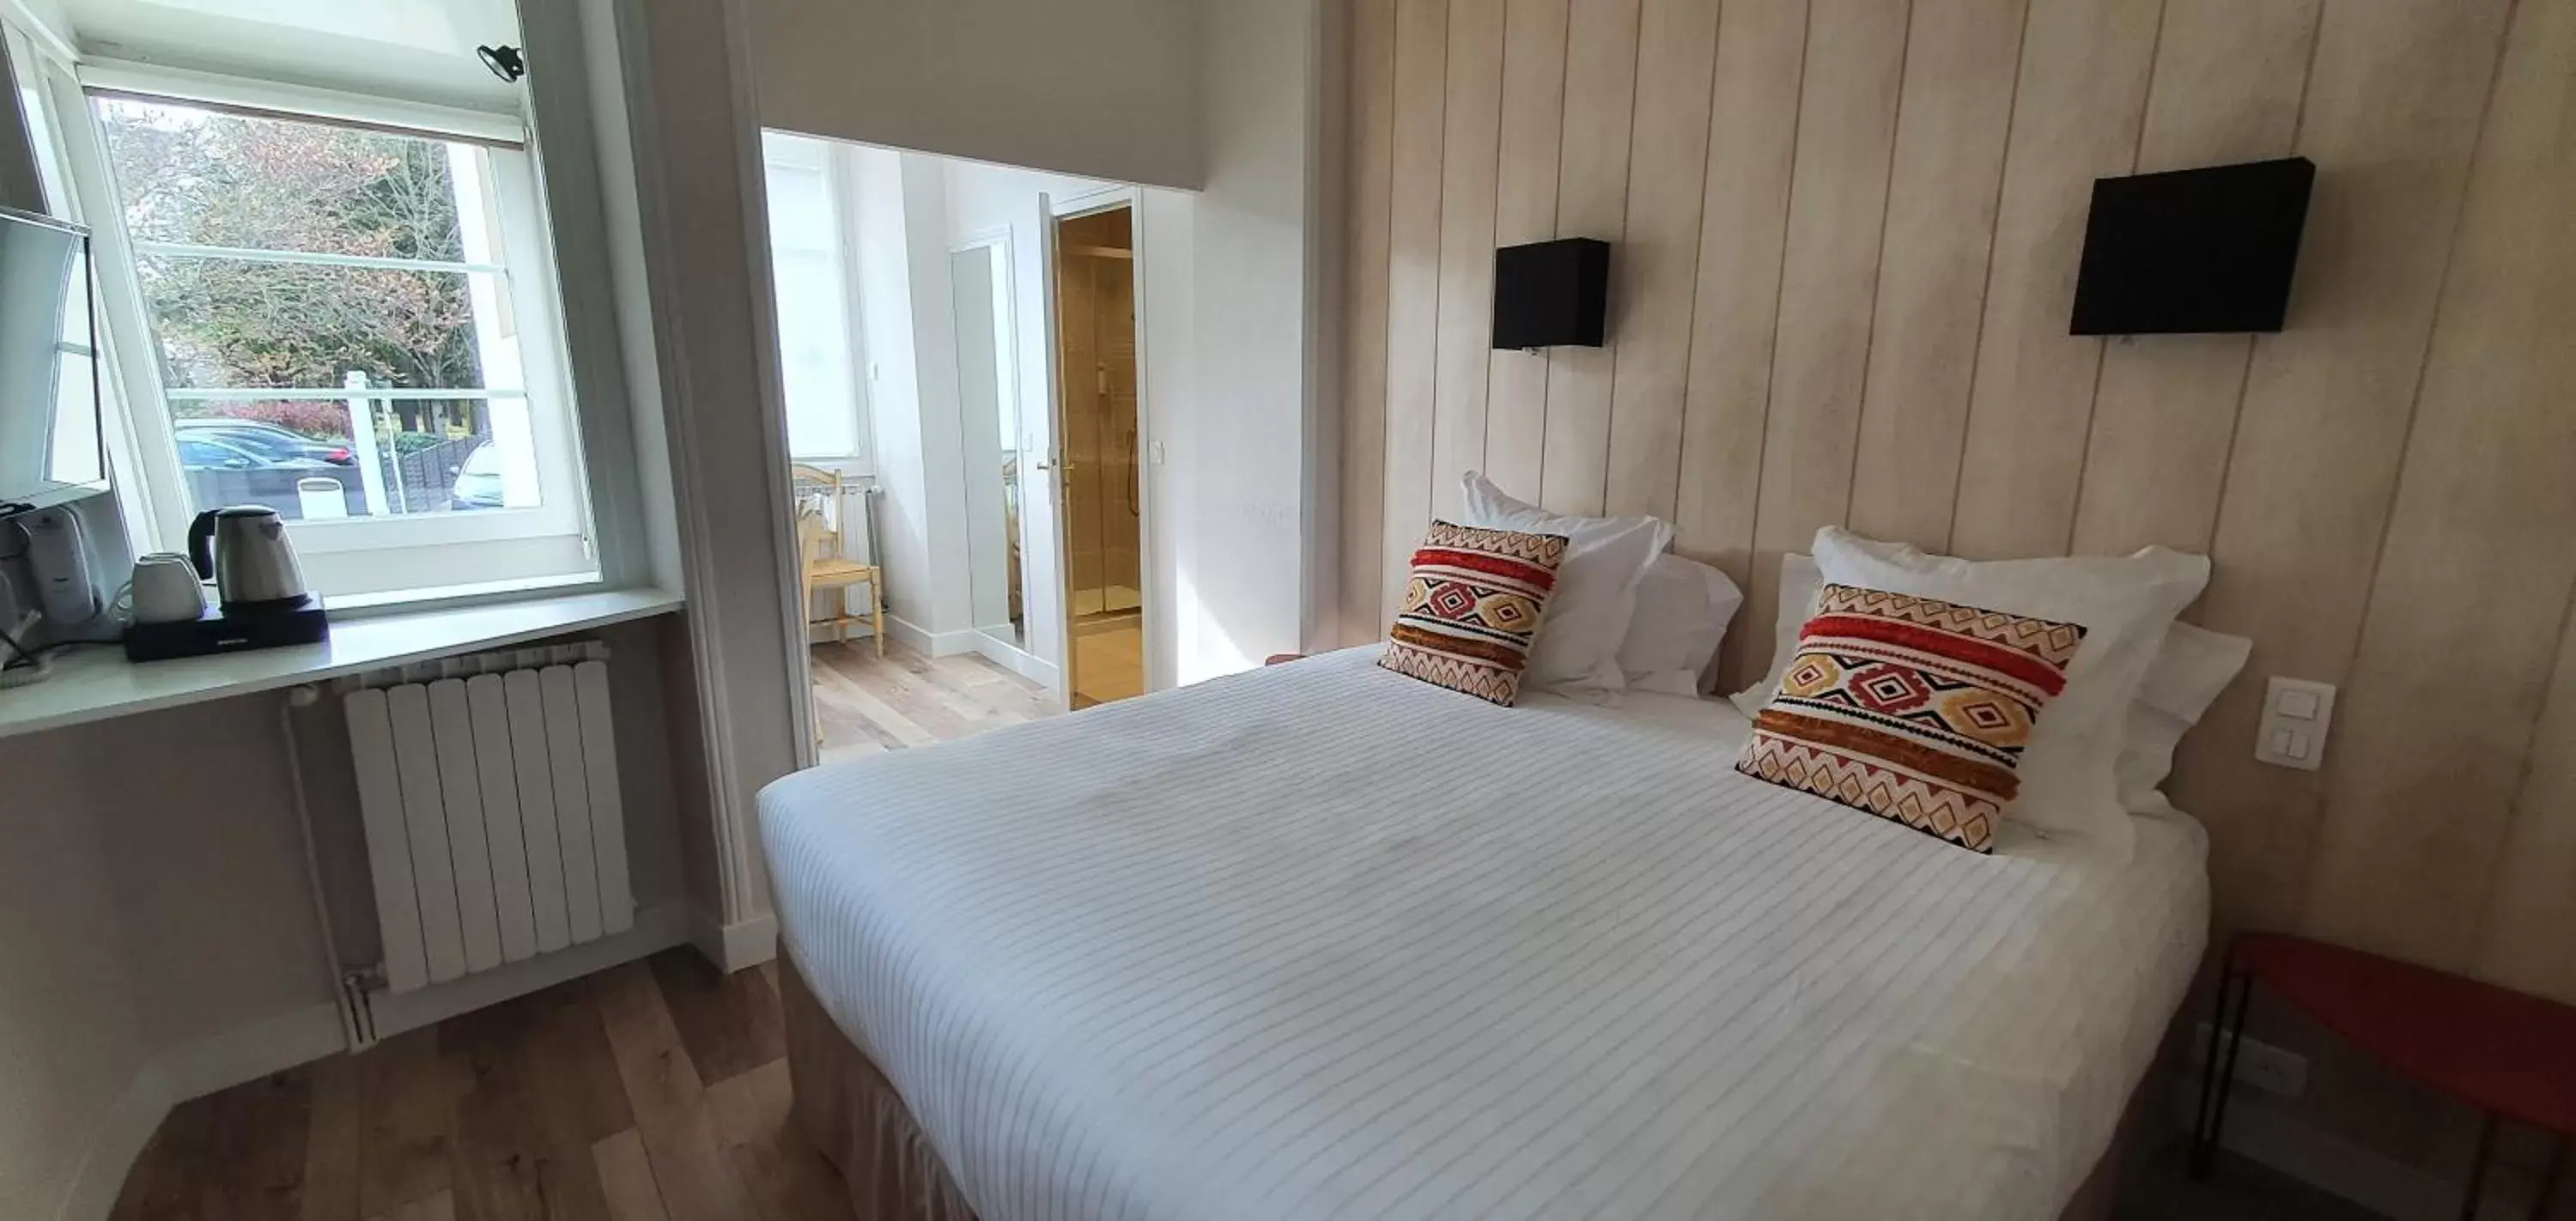 Property building, Bed in Logis Hotel La Closerie